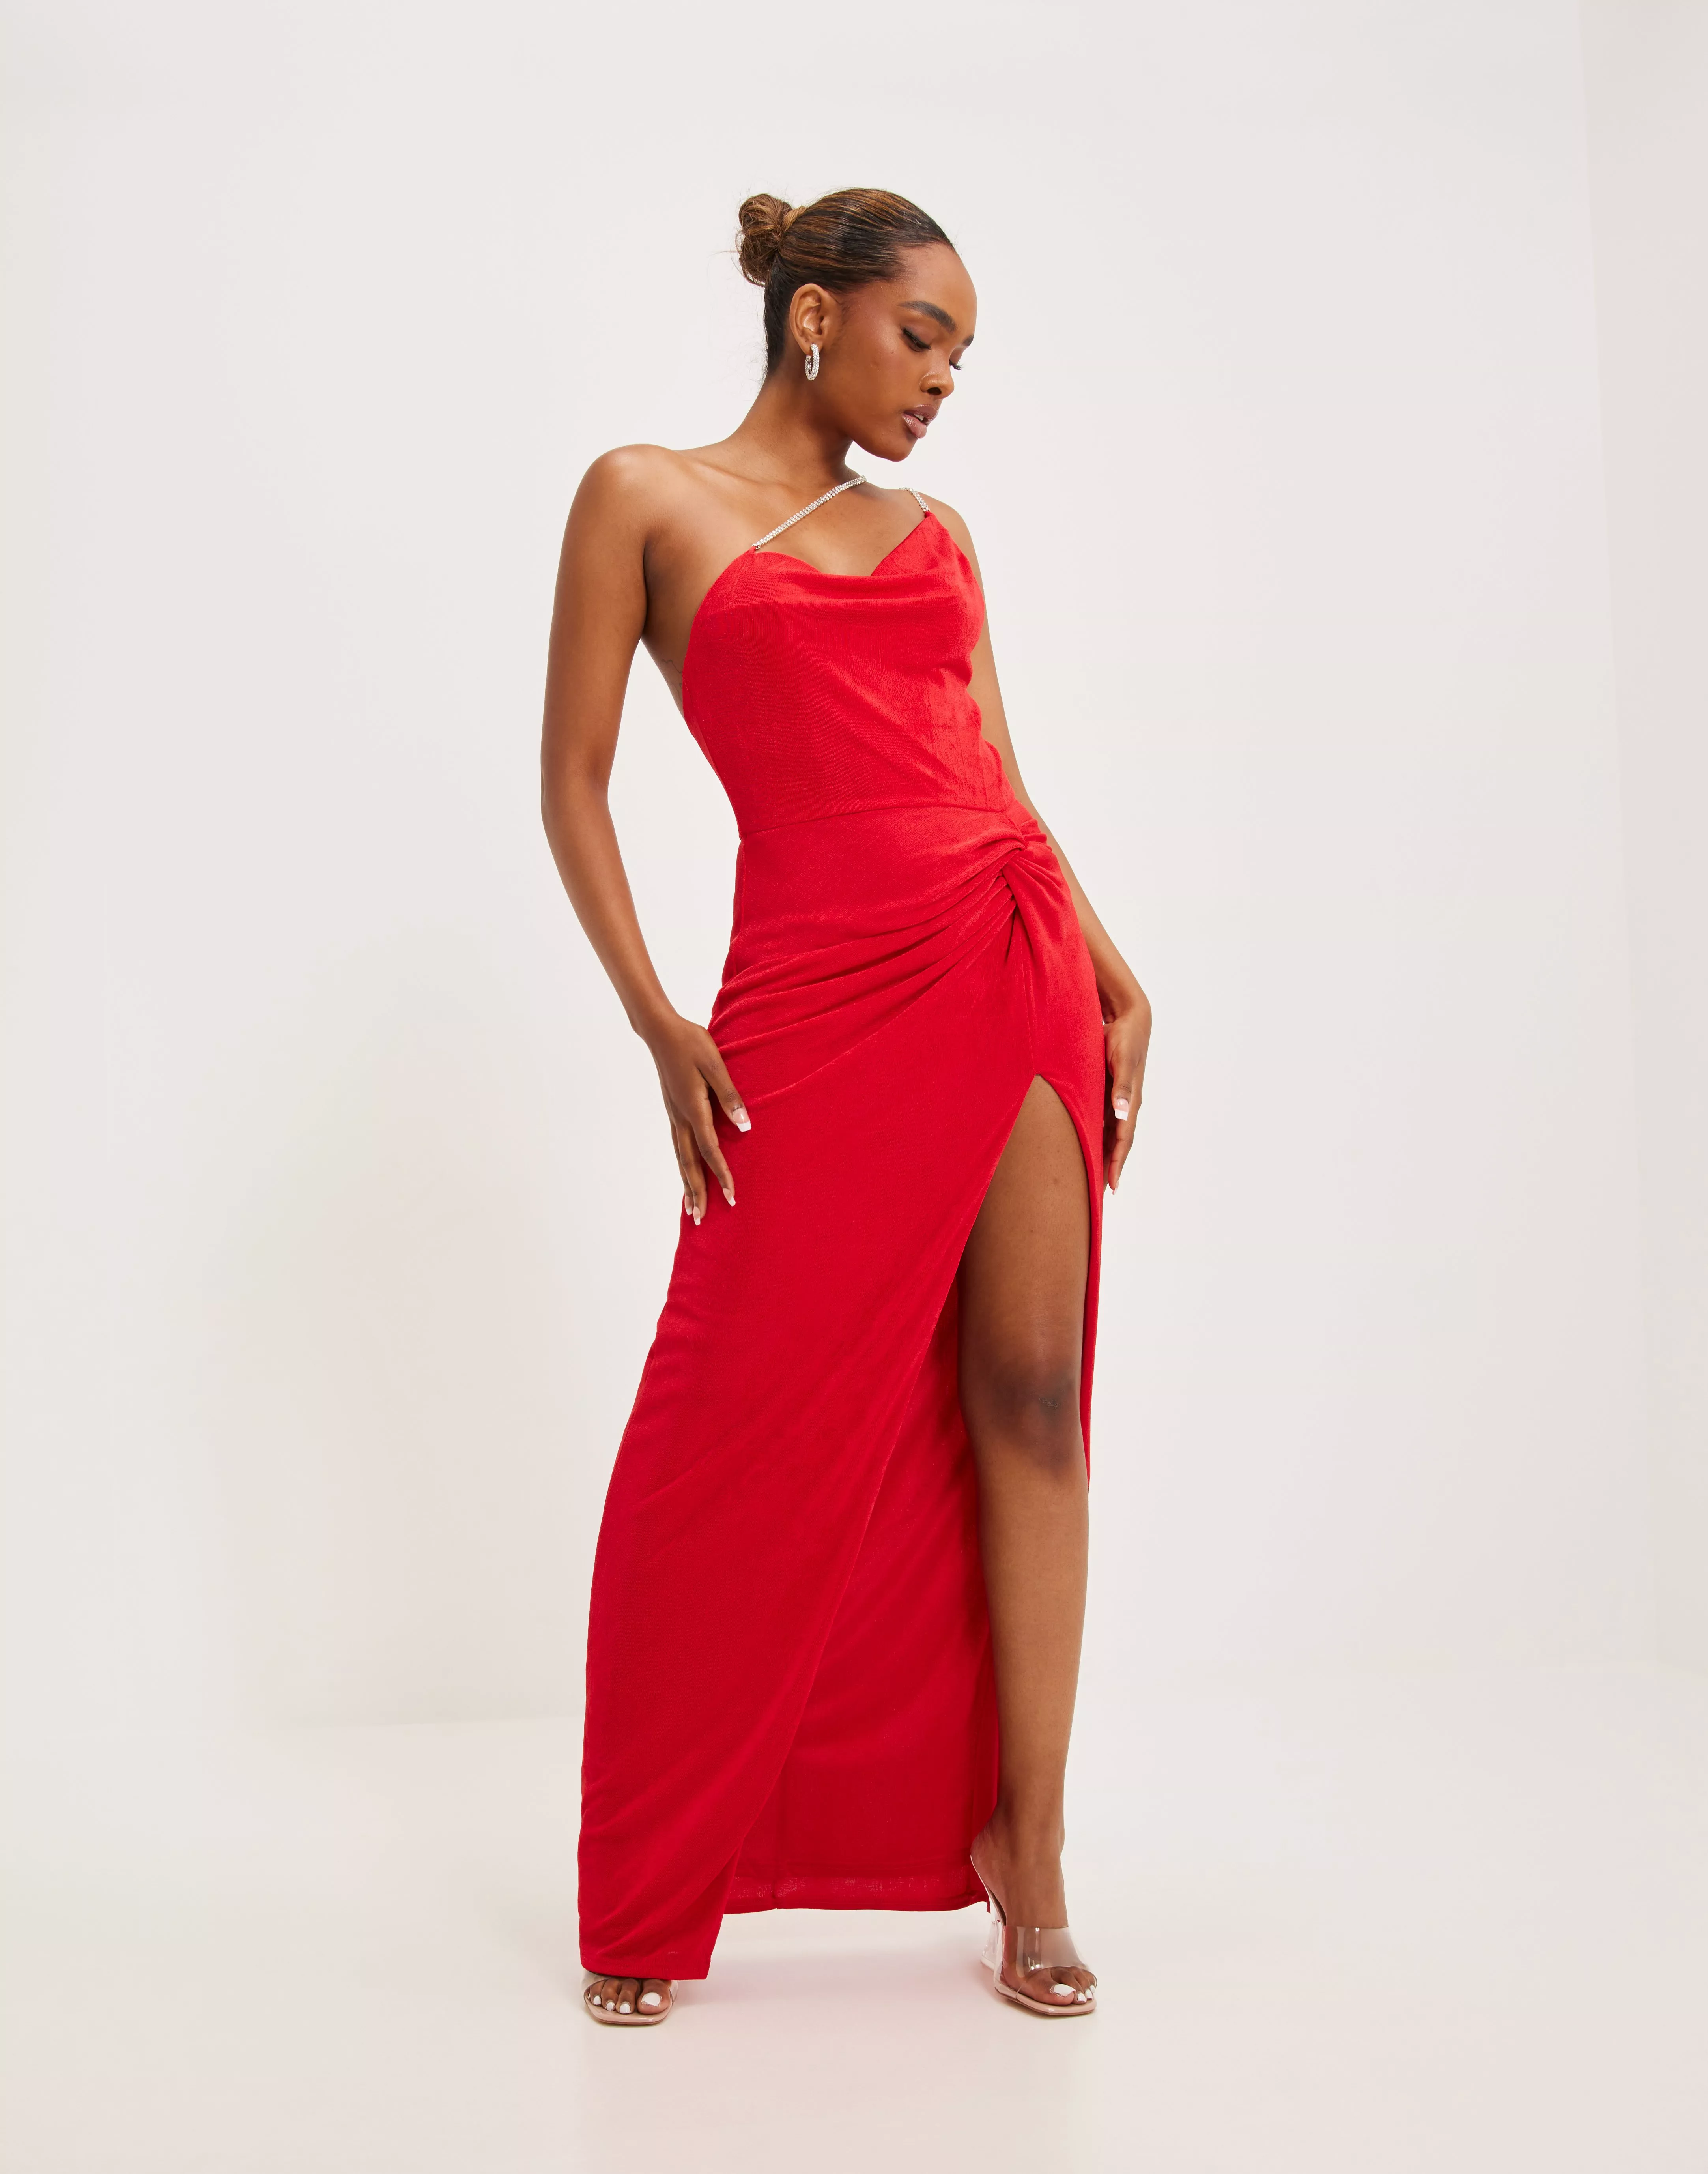 Buy Nelly Star Of The Night Dress - Red | Nelly.com